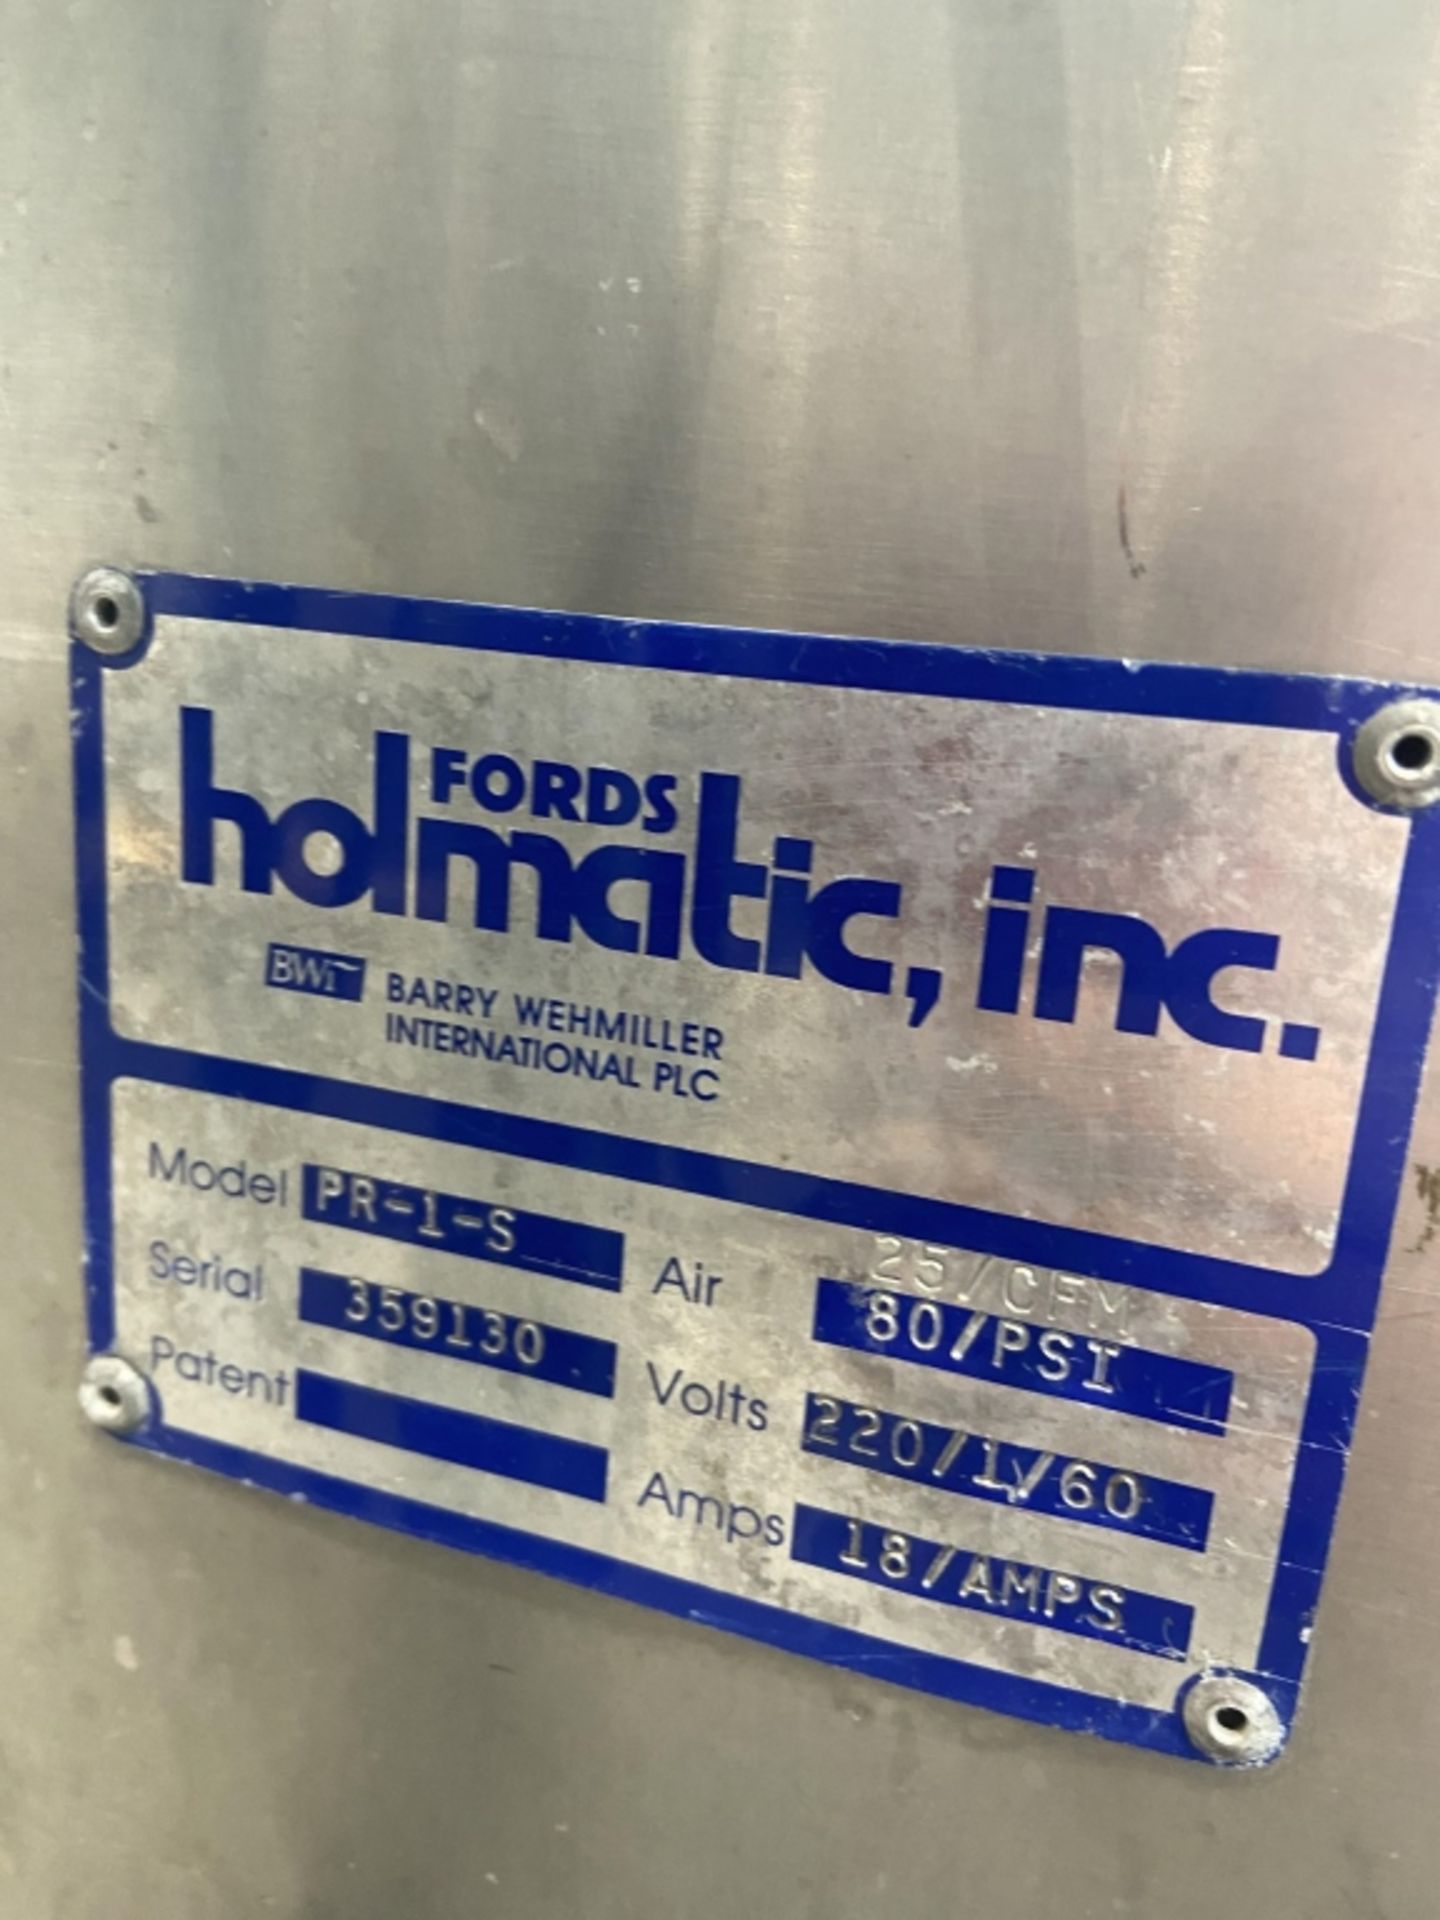 HOLMATIC BULK FILLER, MODEL PR-1-S, S/N 359130, FILLS 5LB AND 40 OZ, TWO SIZE CUPS 513 AND 502 MM, - Image 17 of 20